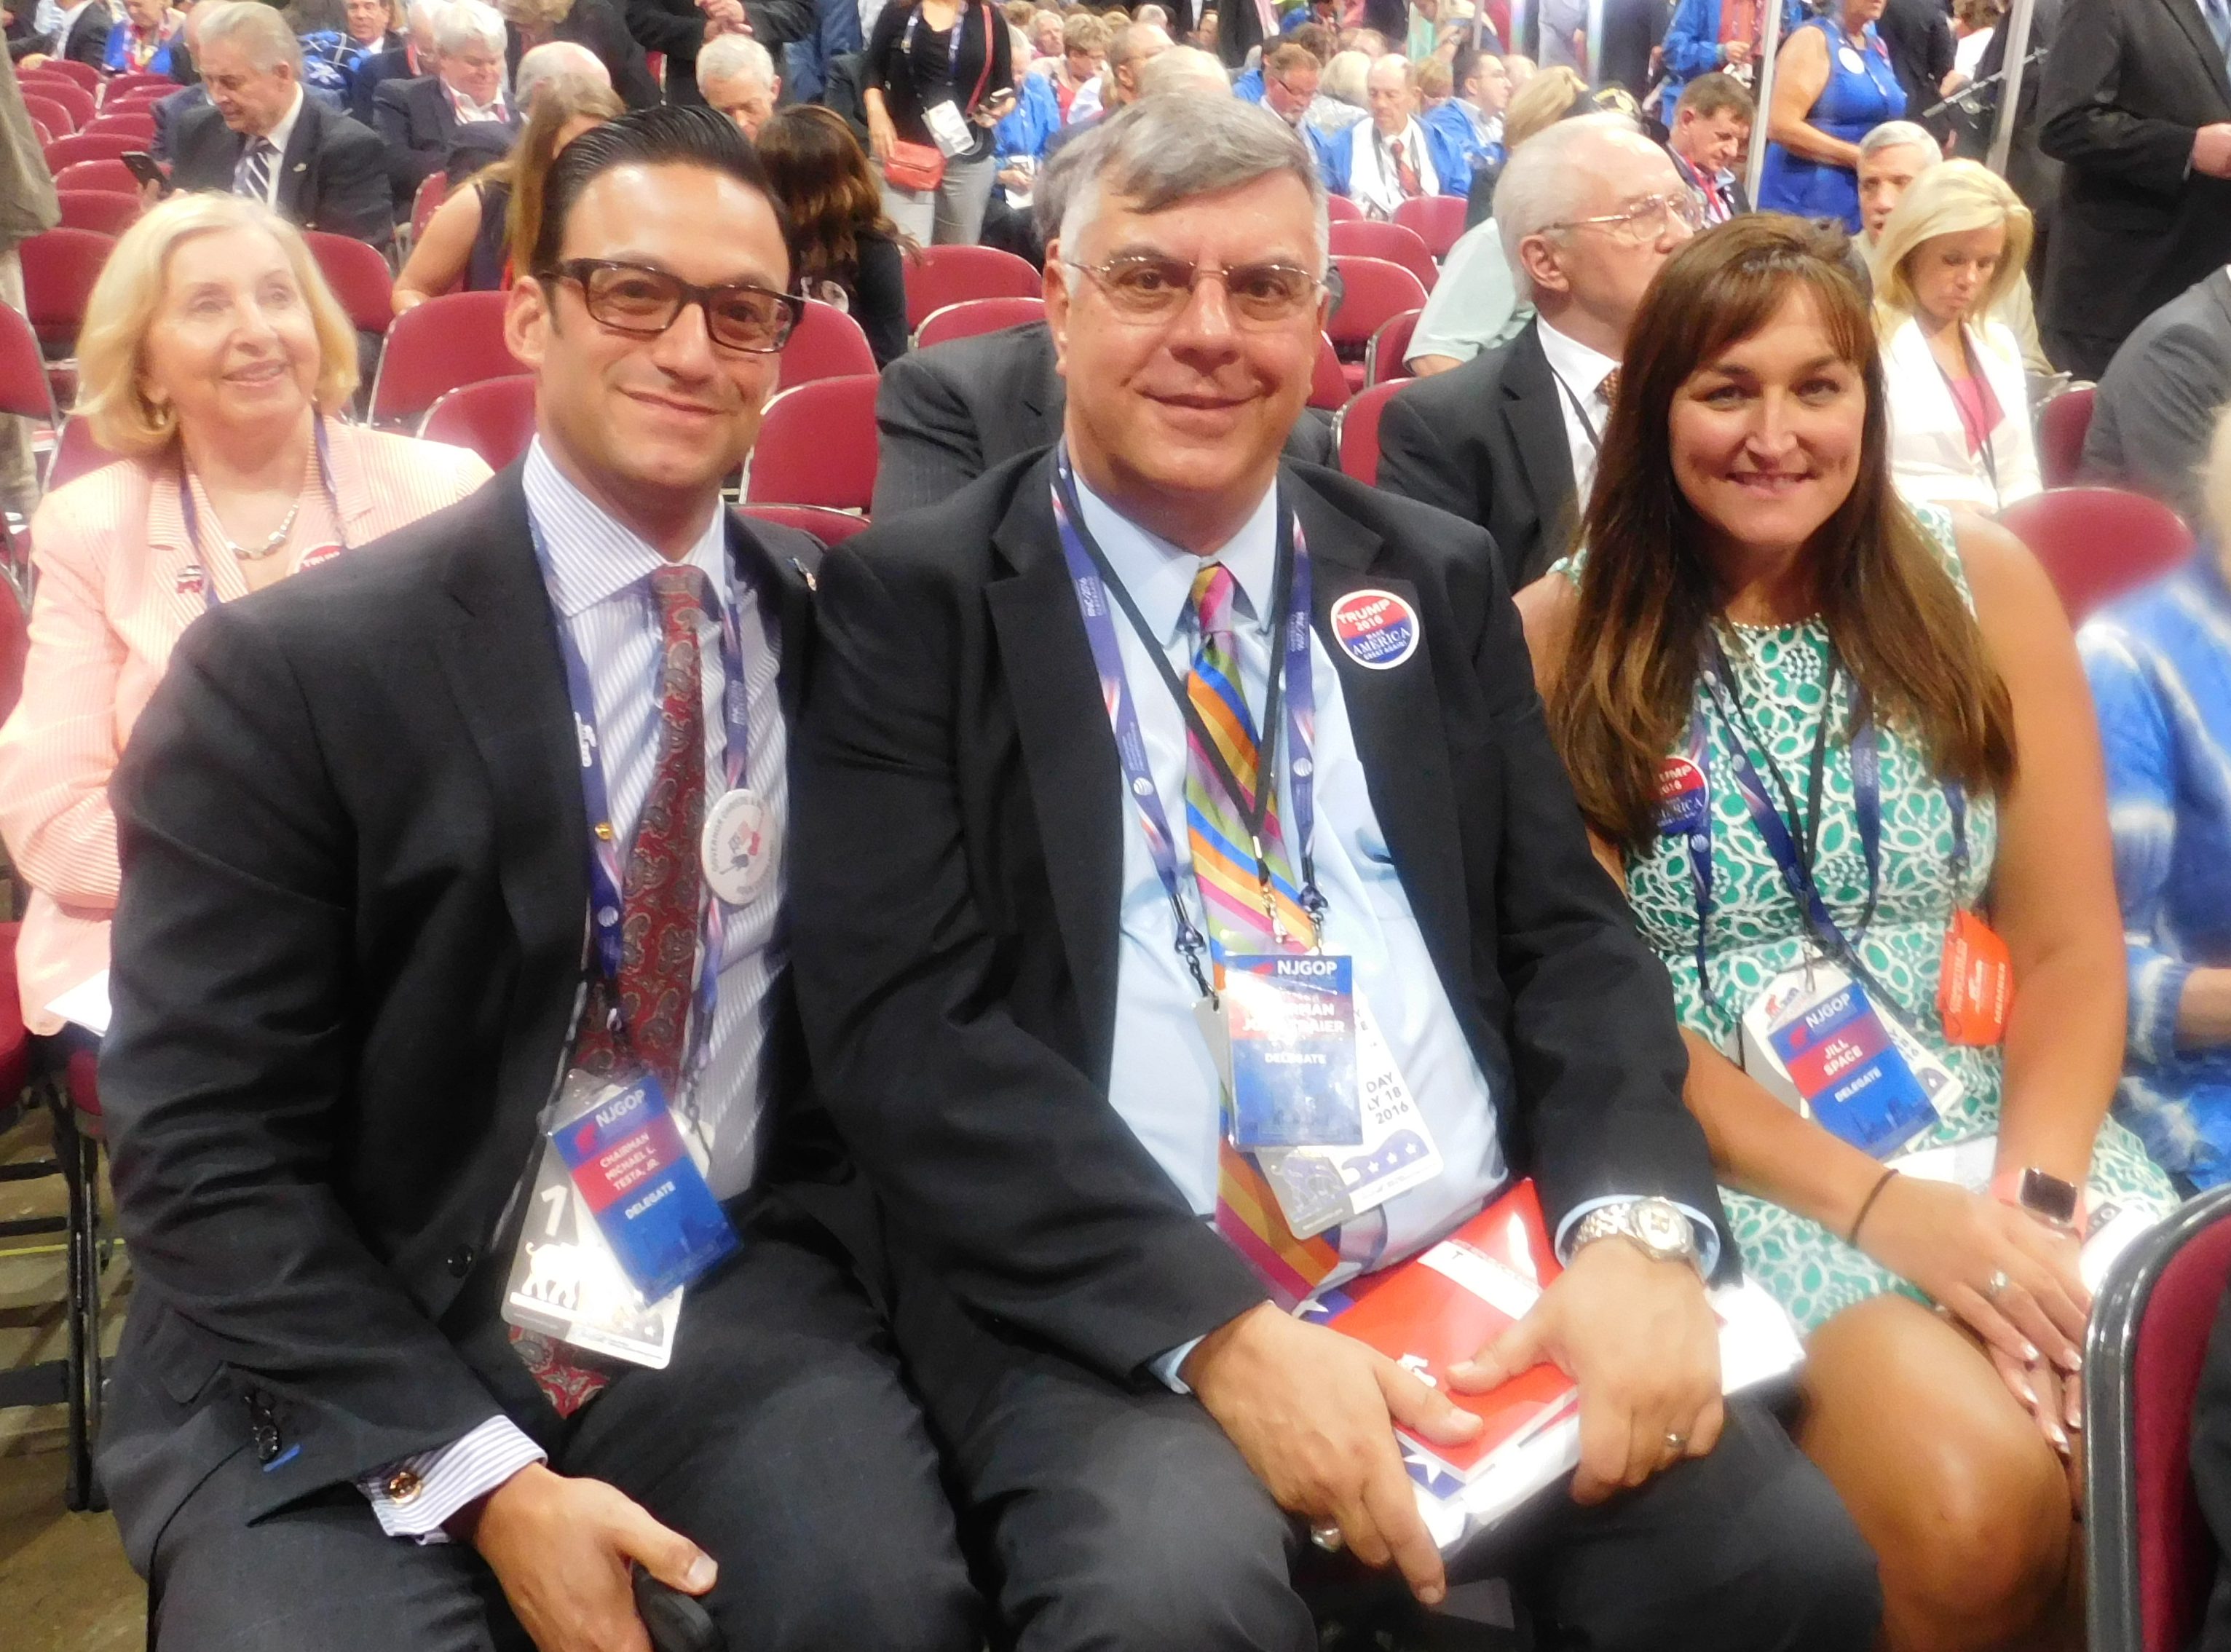 From left: Testa, Traier and Space at the 2016 RNC. 